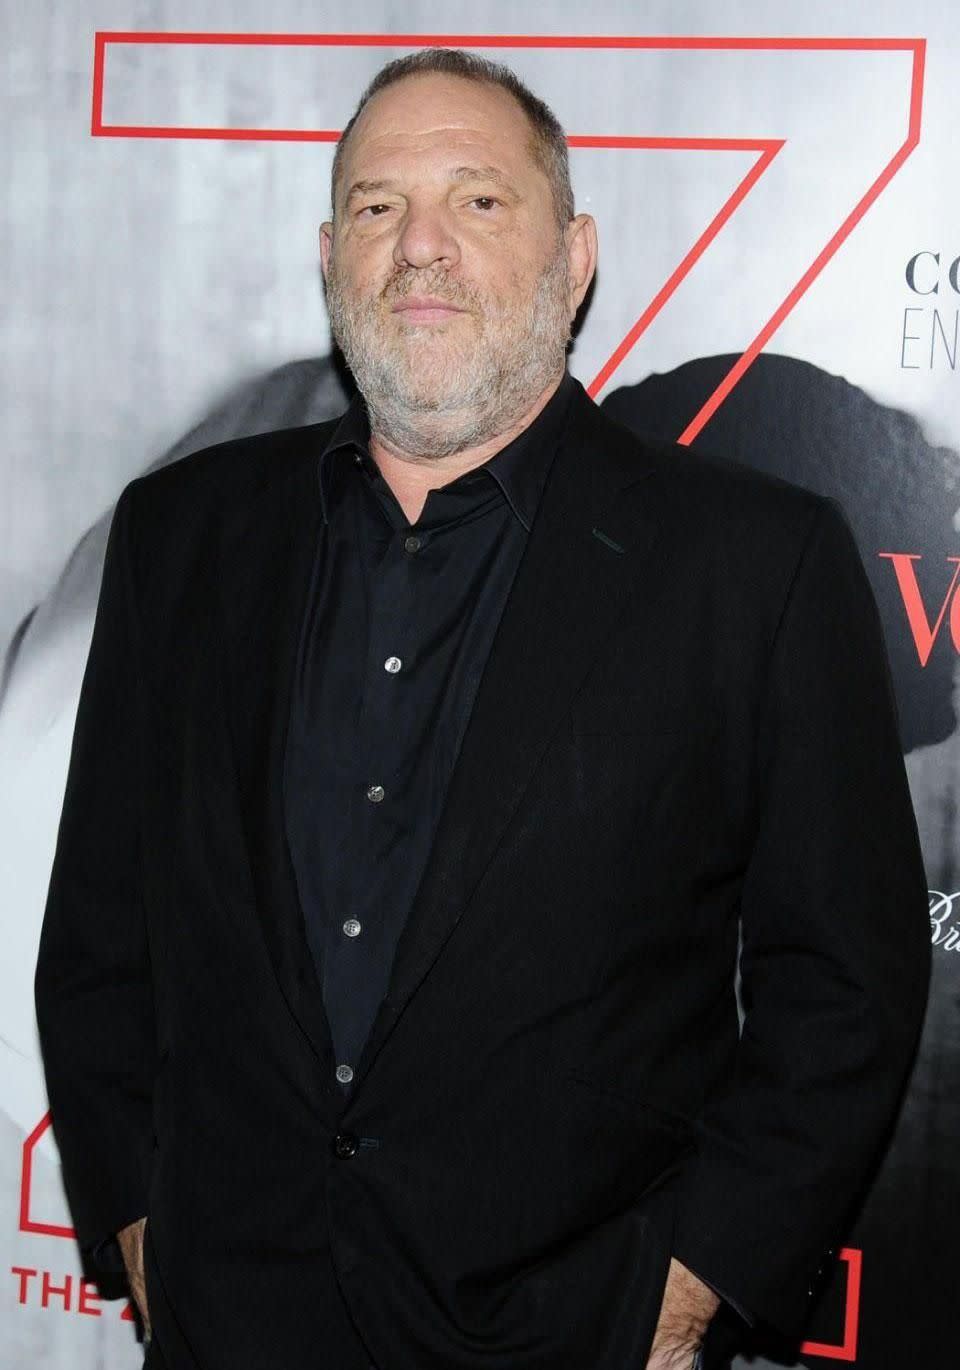 Film producer Harvey Weinstein has been faced with several claims of sexual assault over the past weeks. Source: Getty